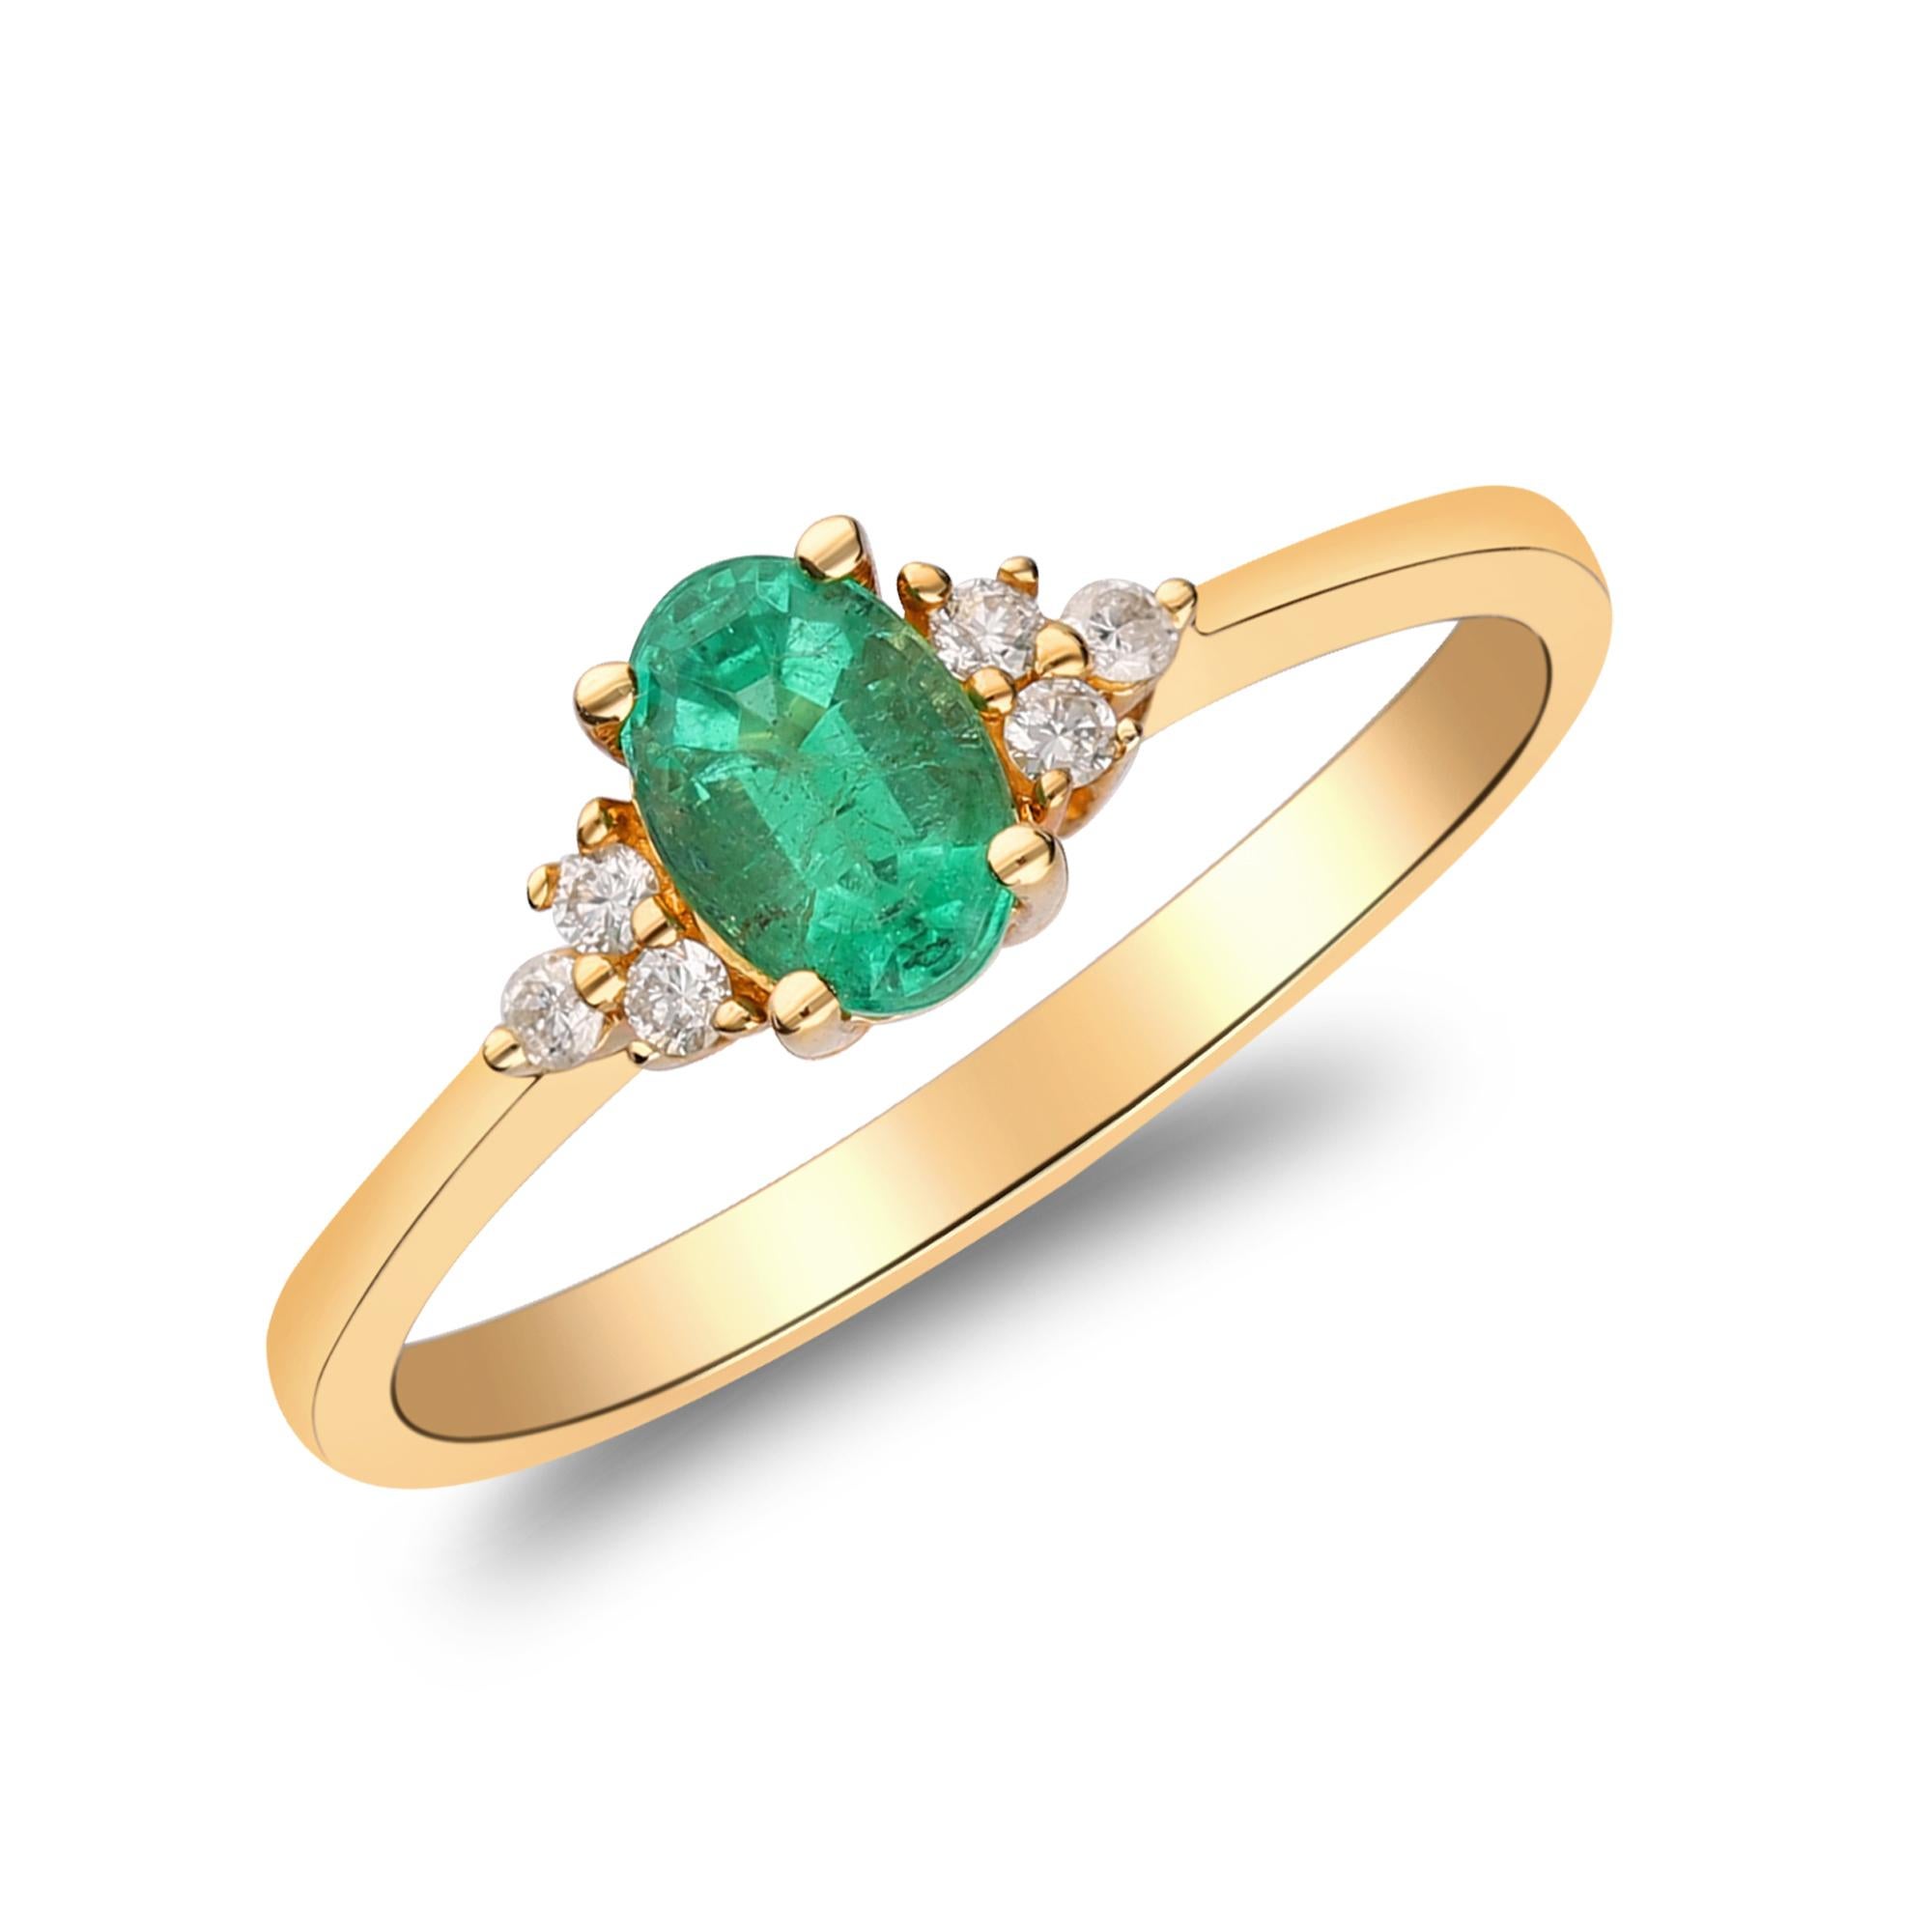 0.55 Carat Emerald Oval Cut Diamond Accents 10K Yellow Gold Engagement Ring Neuf - En vente à New York, NY